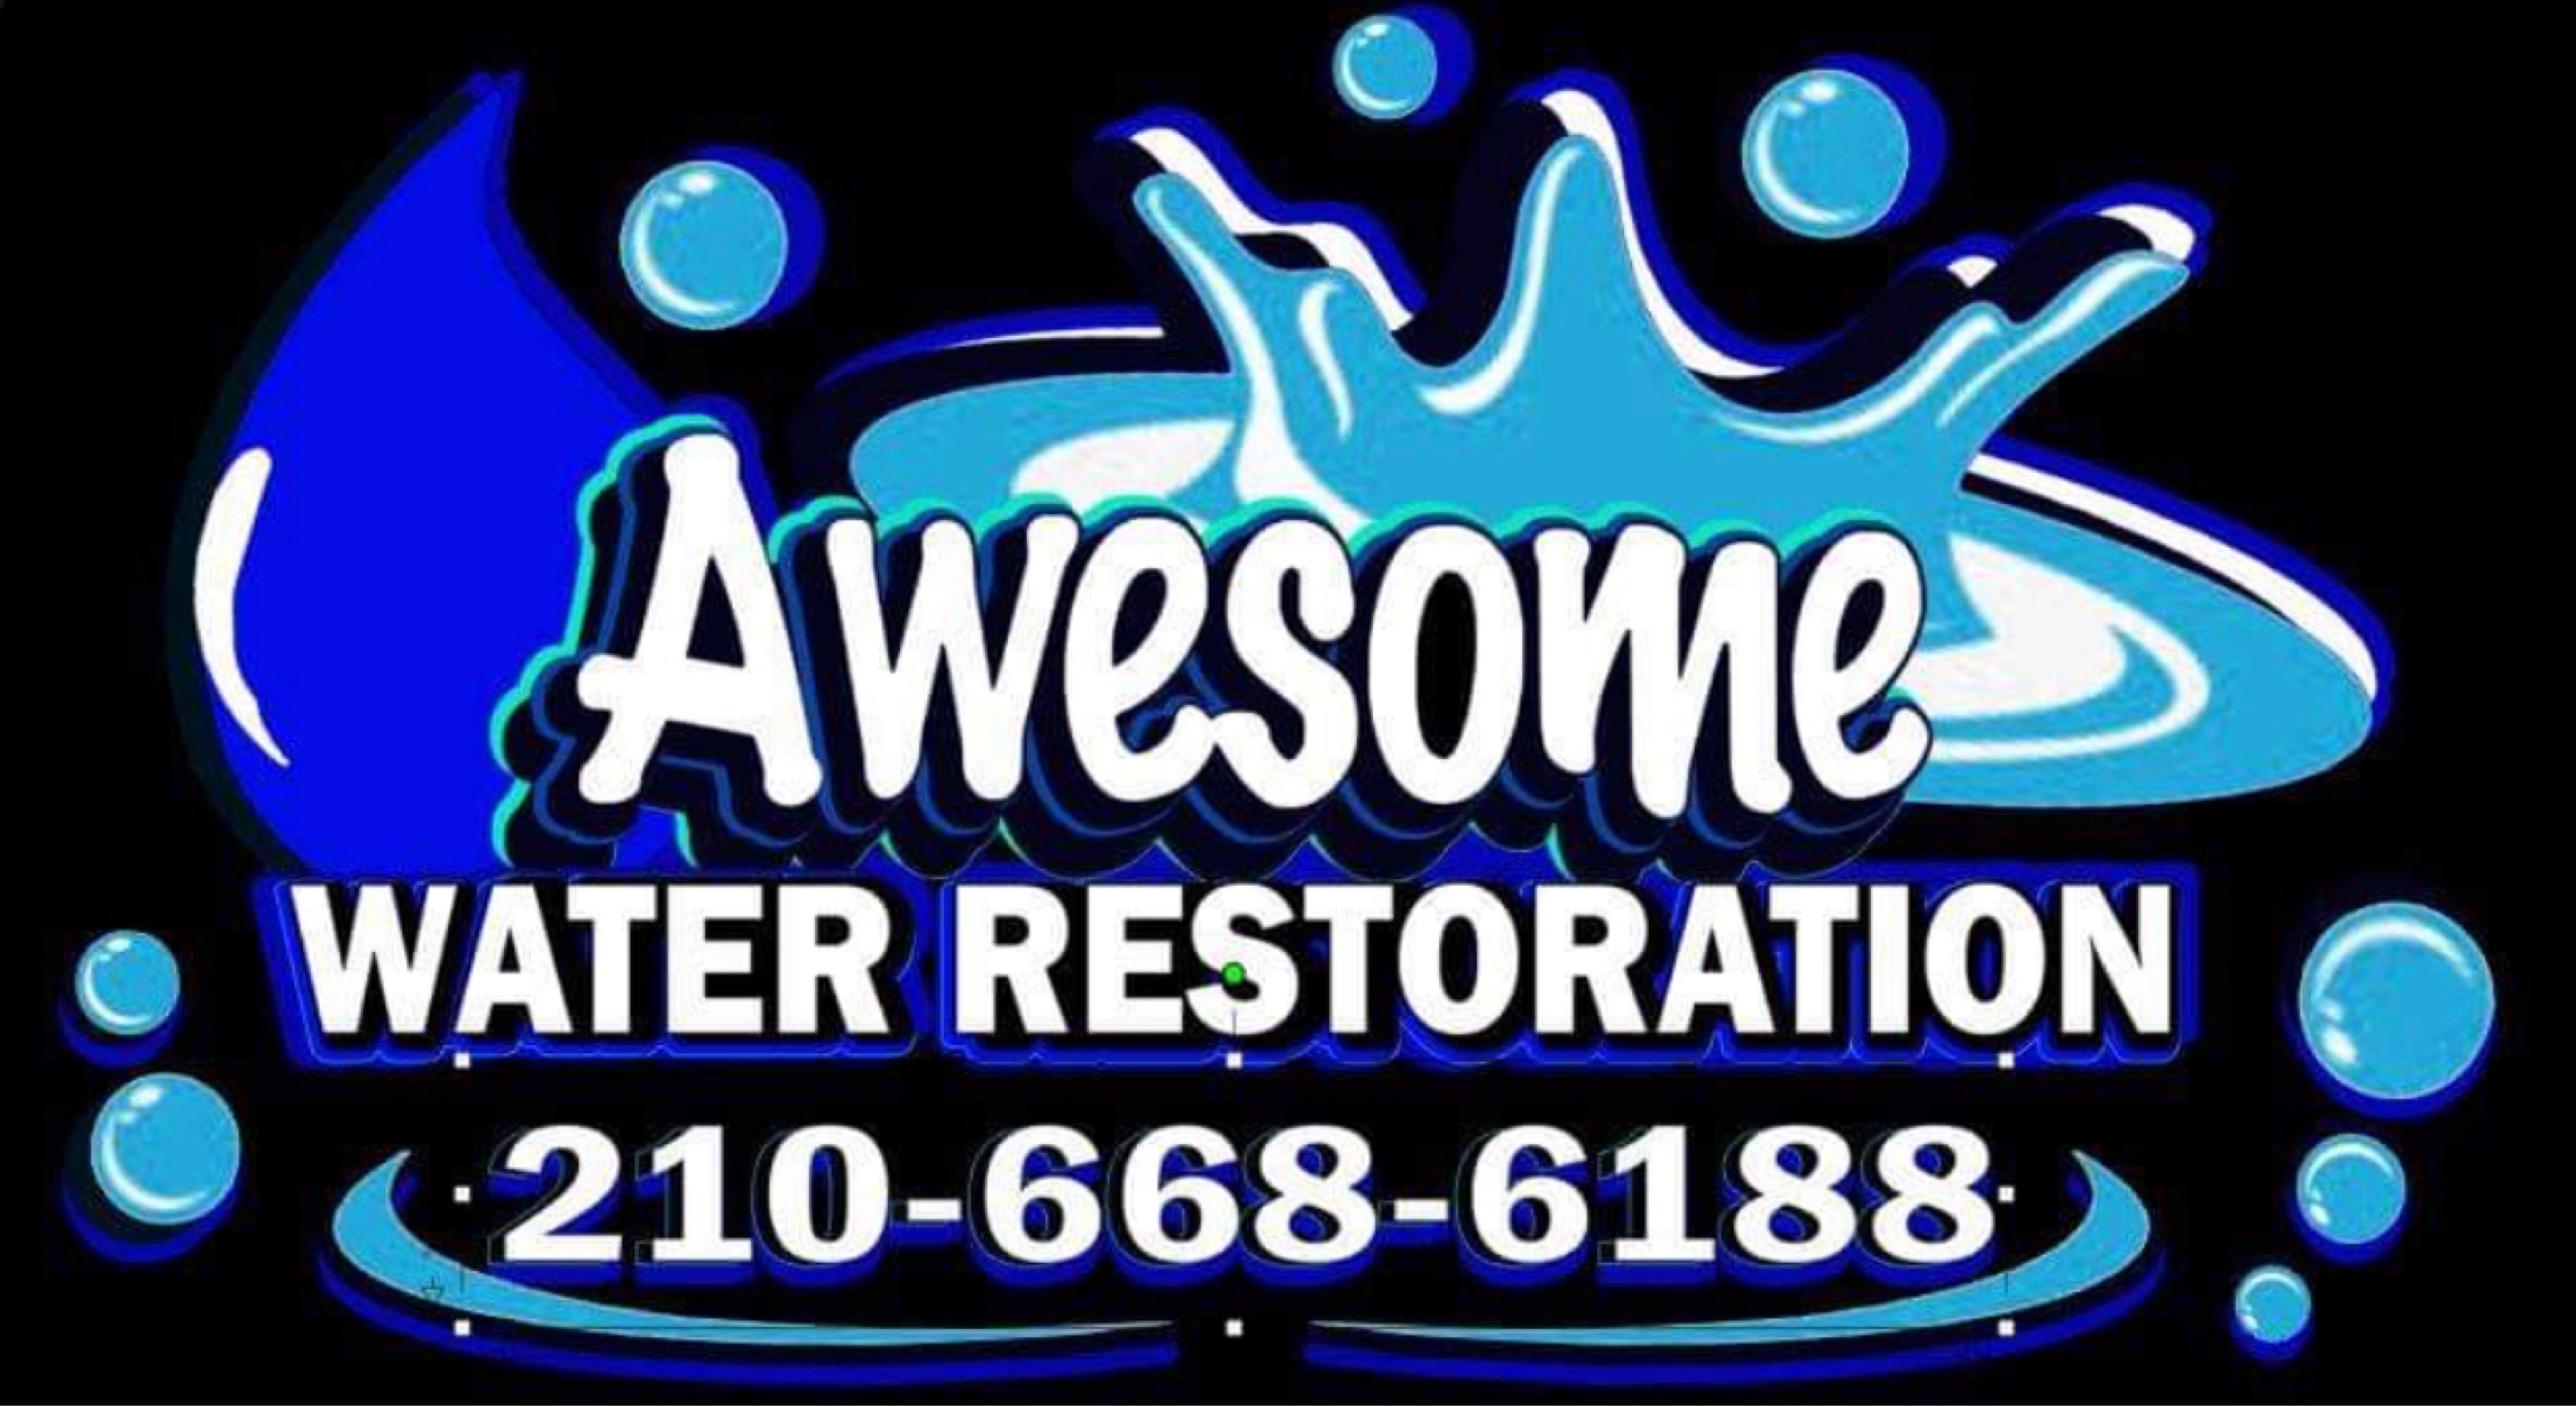 Awesome Water Restoration Services, Corp. Logo